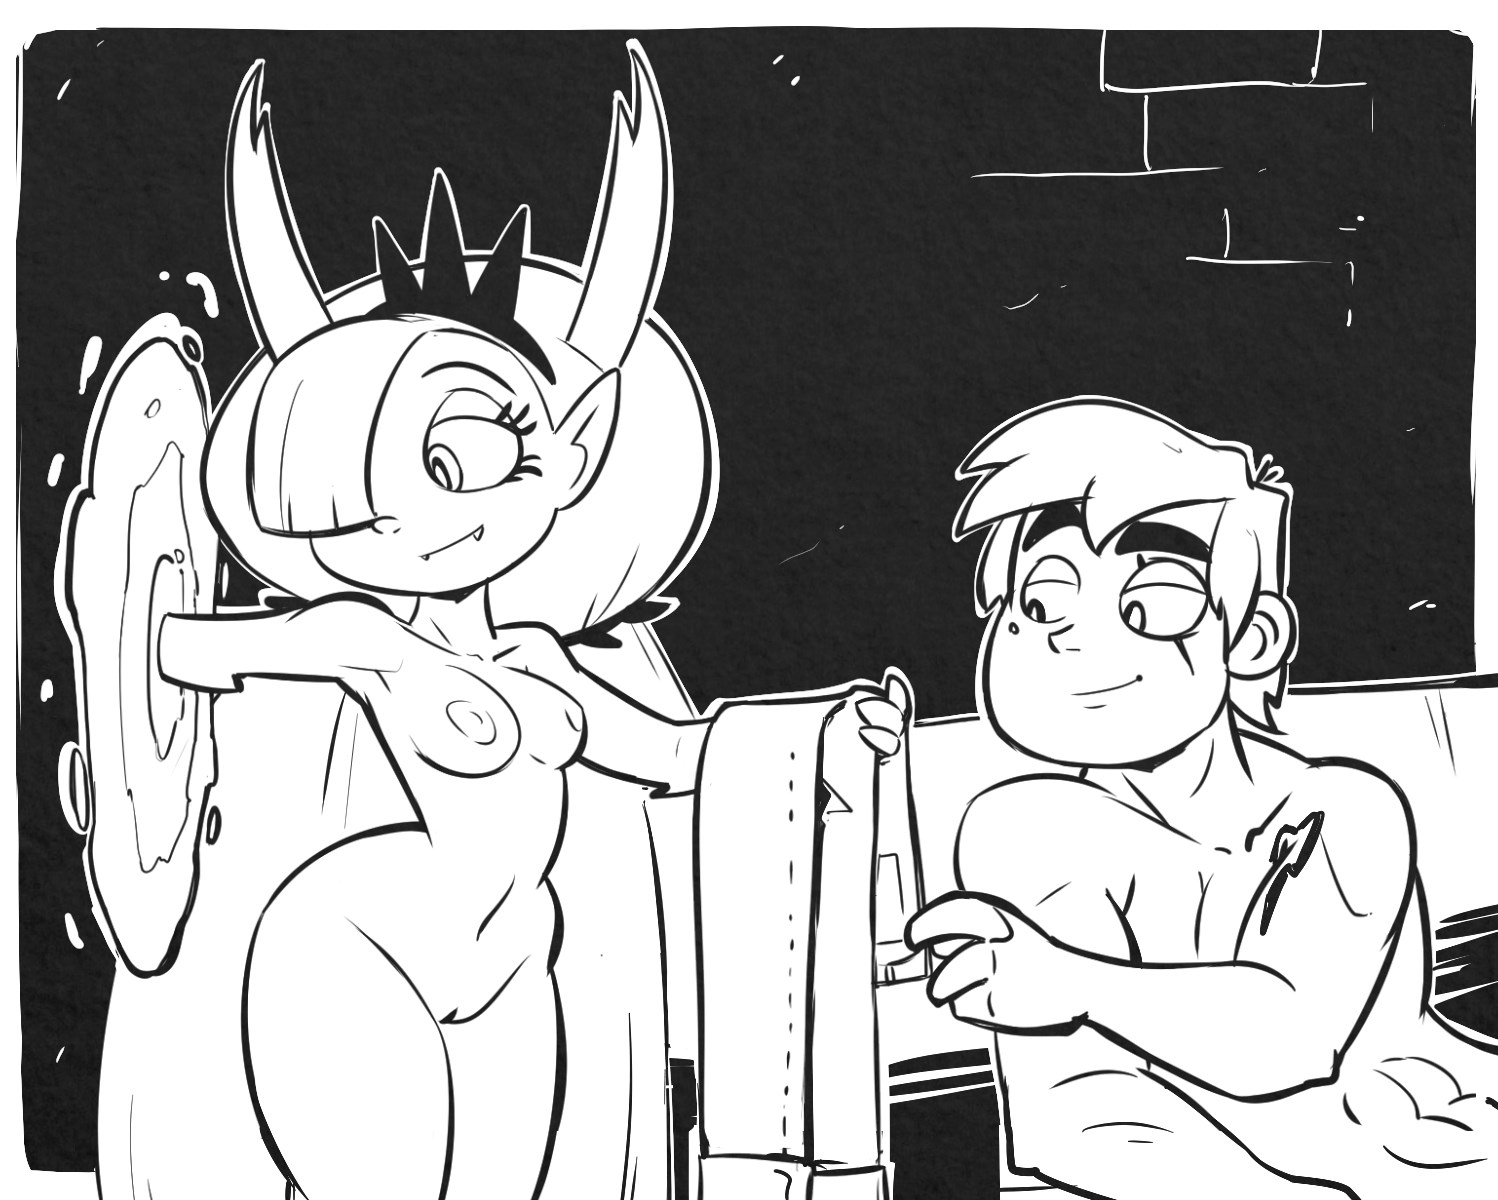 Hekapoo Markapoo - ADULTS ONLY sex porn comics online star vs. the forces.....